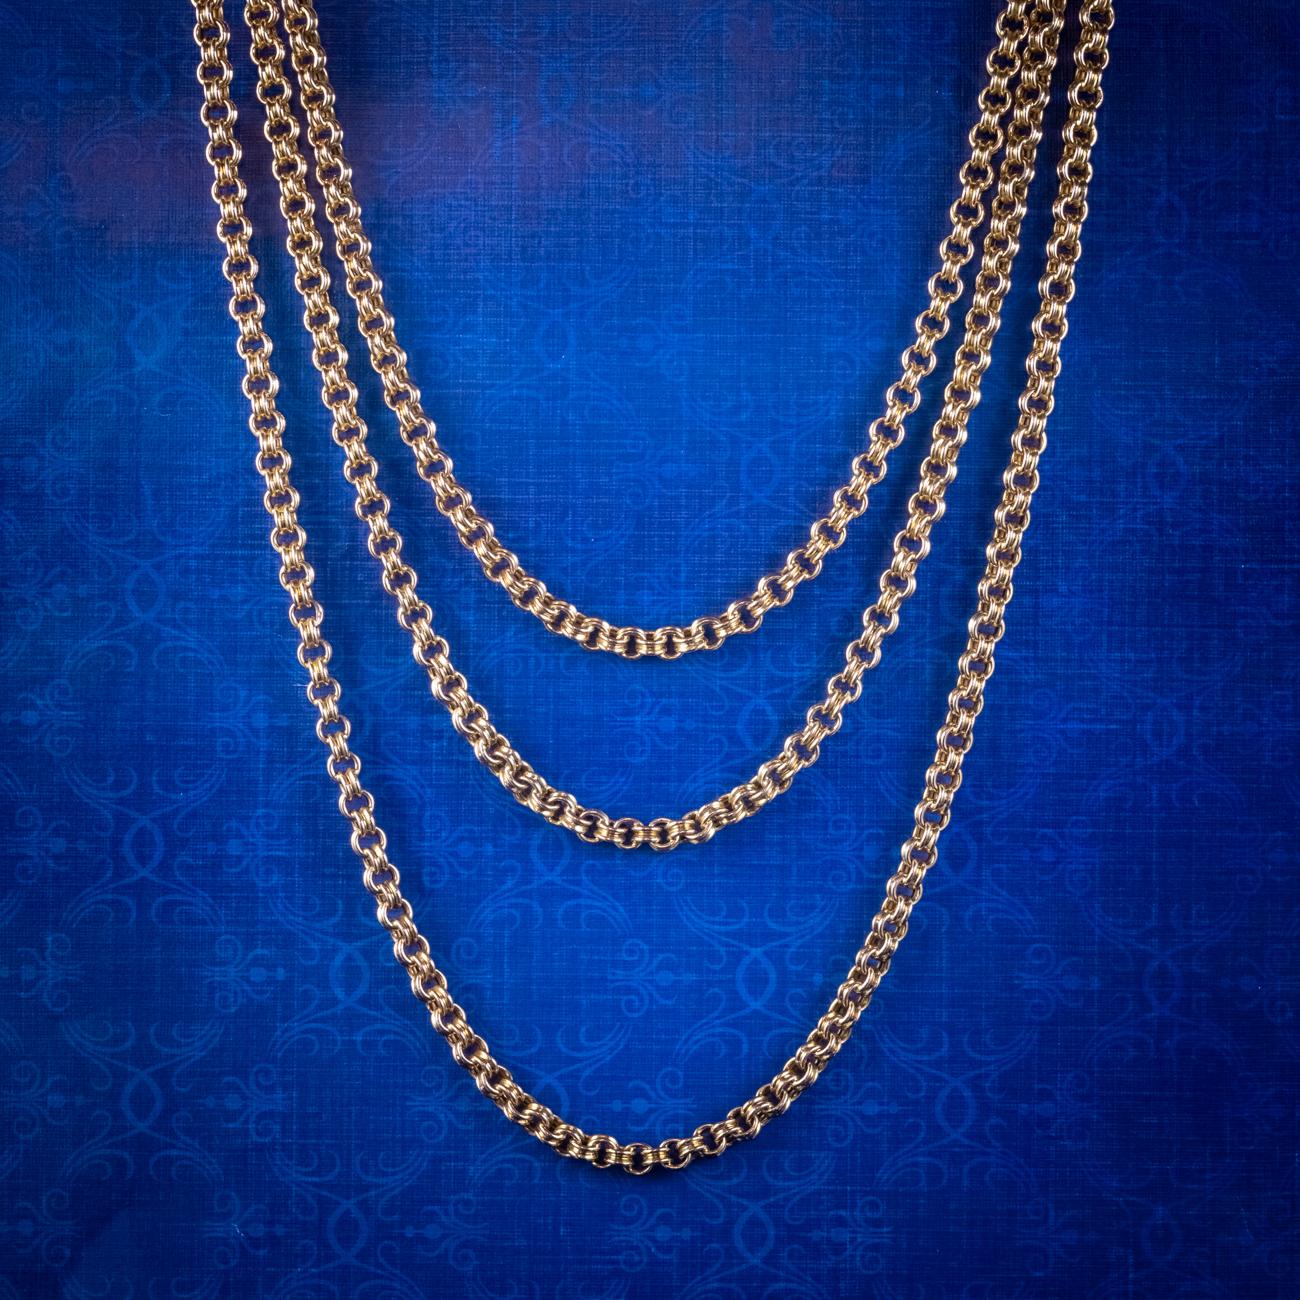 A grand antique Victorian Guard chain from the late 19th Century consisting of solid 15ct yellow gold cable links that articulate fluidly together.

It's a generous length, measuring 62 inches in total and can be worn as one long chain or looped two